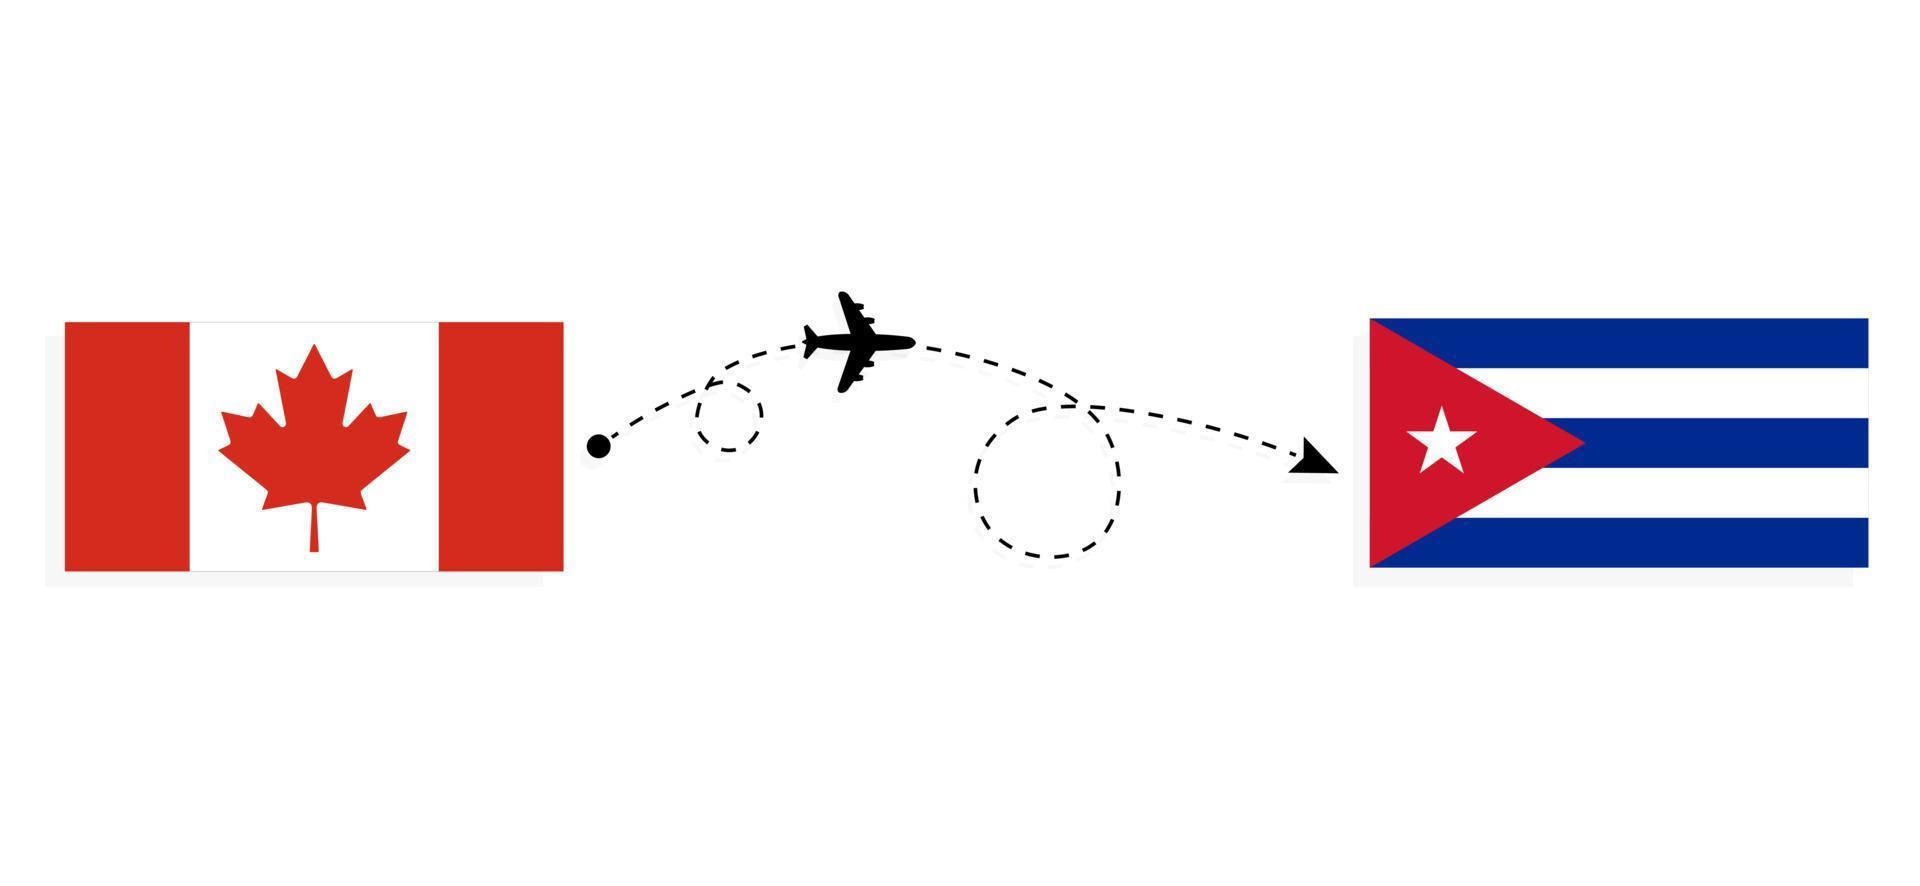 Flight and travel from Canada to Cuba by passenger airplane Travel concept vector